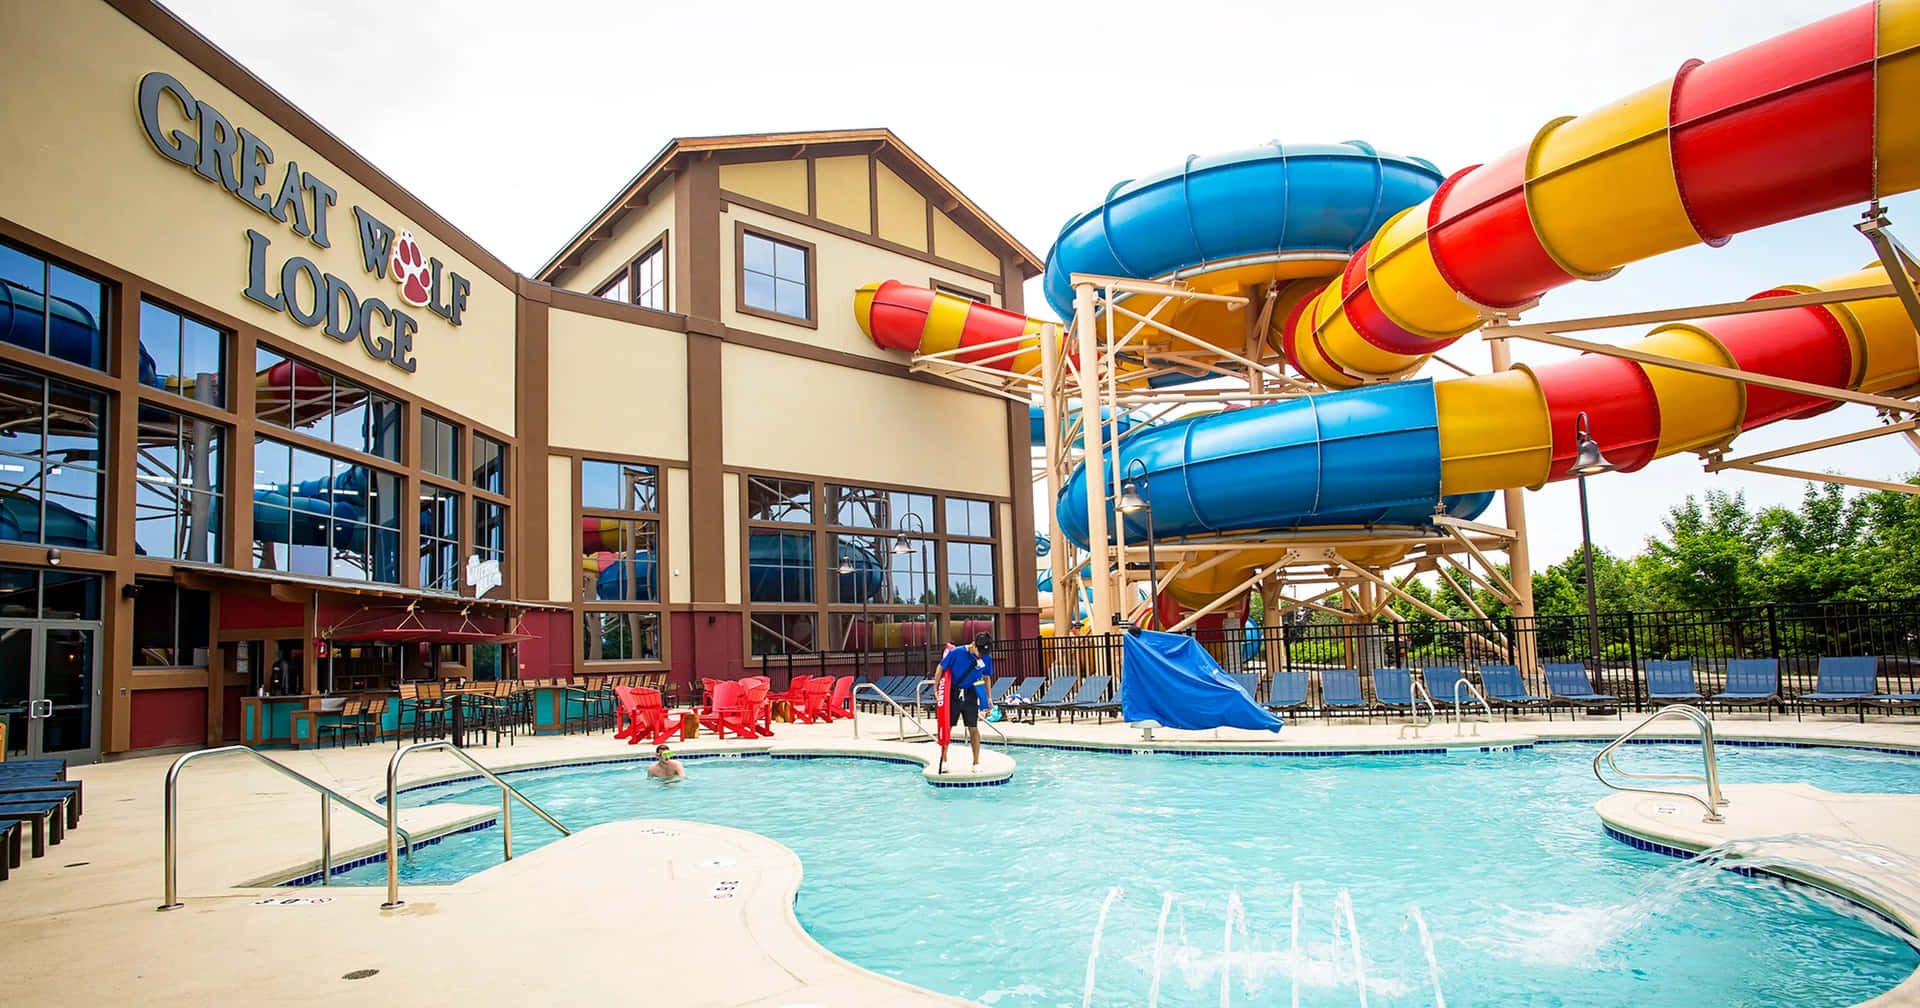 Epic Summer Adventures at Great Wolf Lodge!